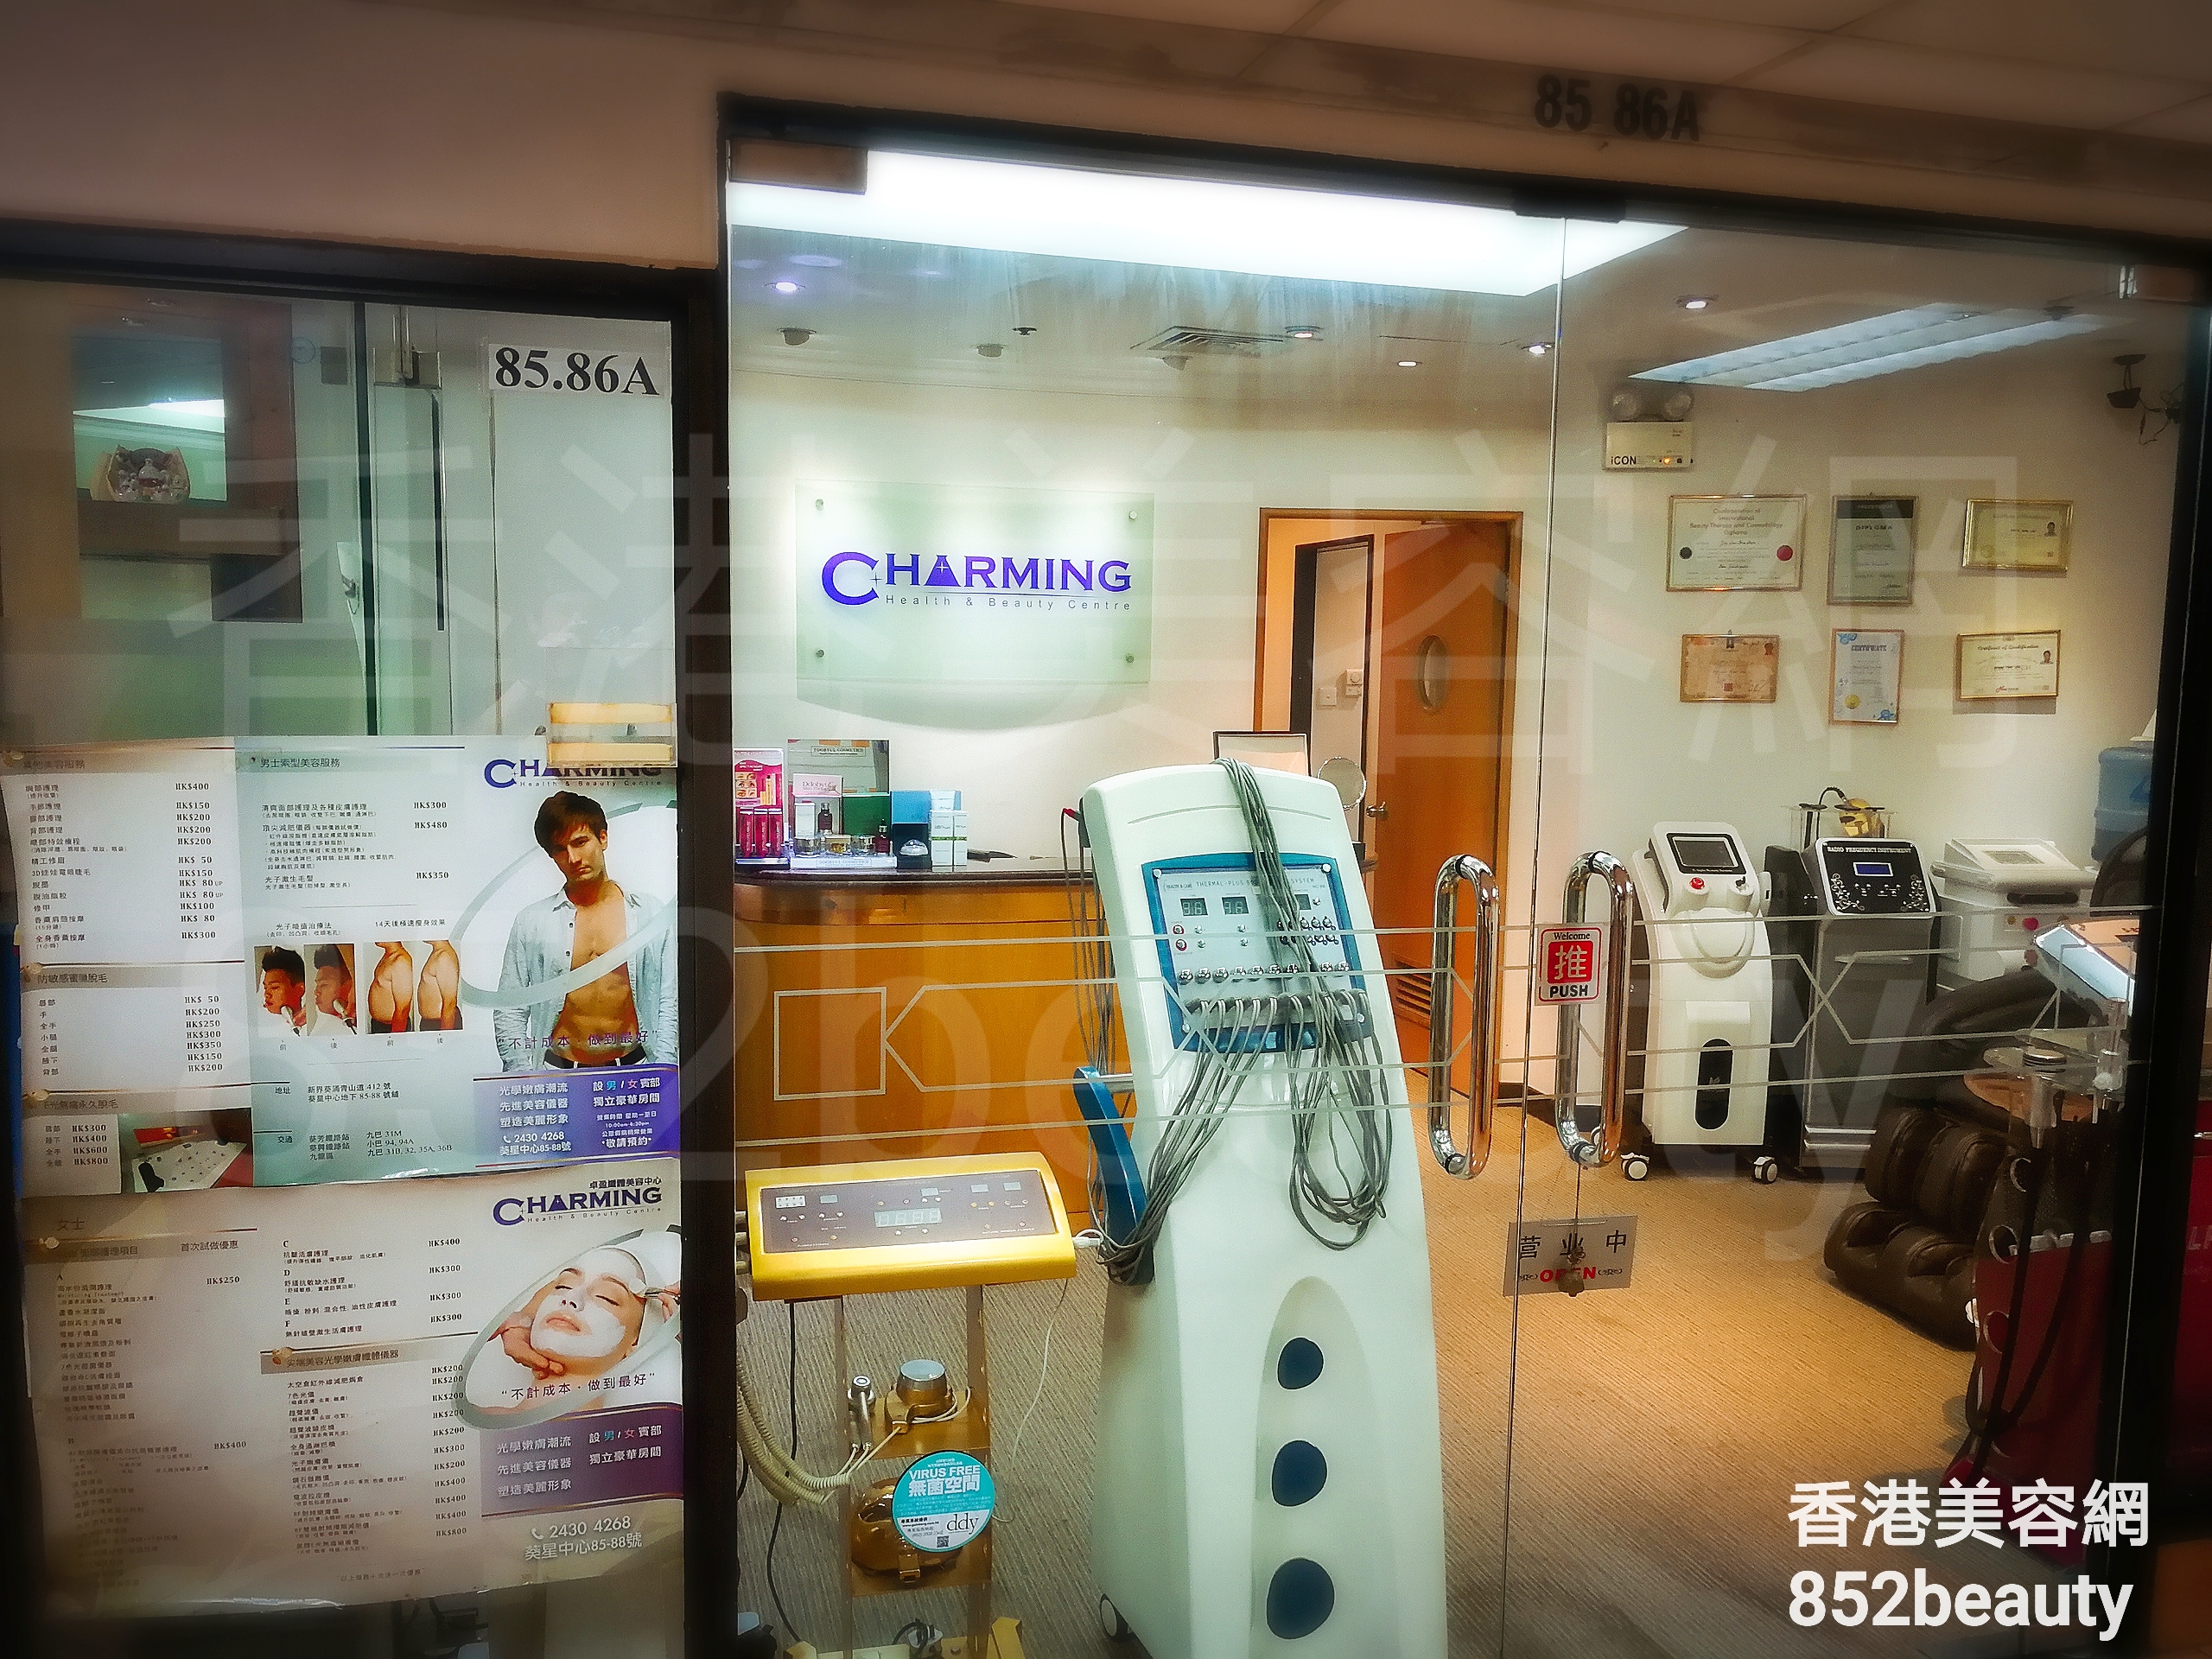 Slimming: Charming Health & Beauty Centre